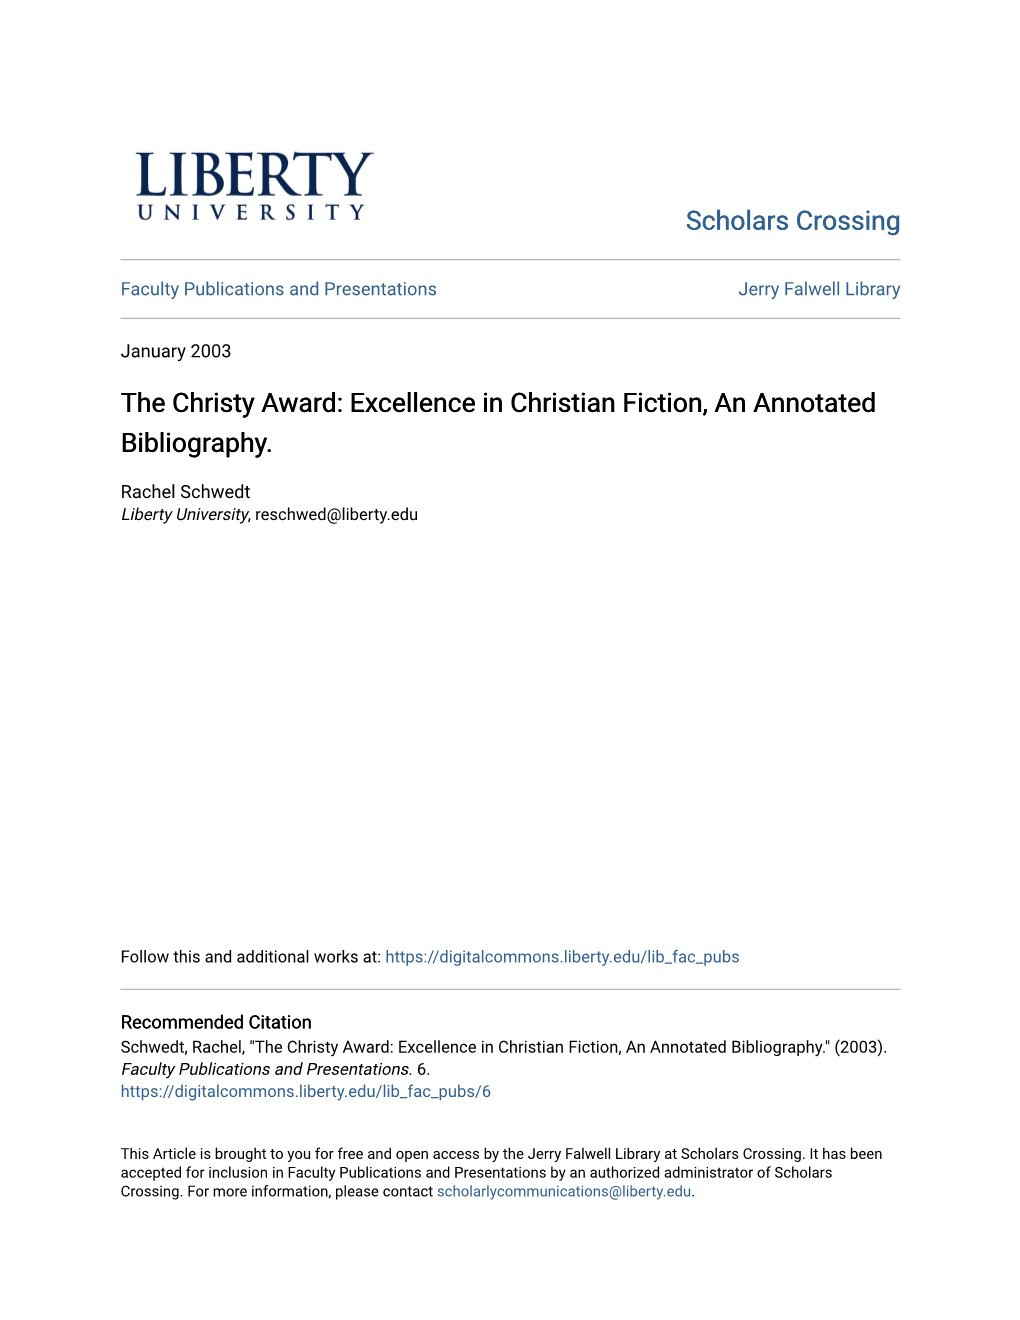 The Christy Award: Excellence in Christian Fiction, an Annotated Bibliography